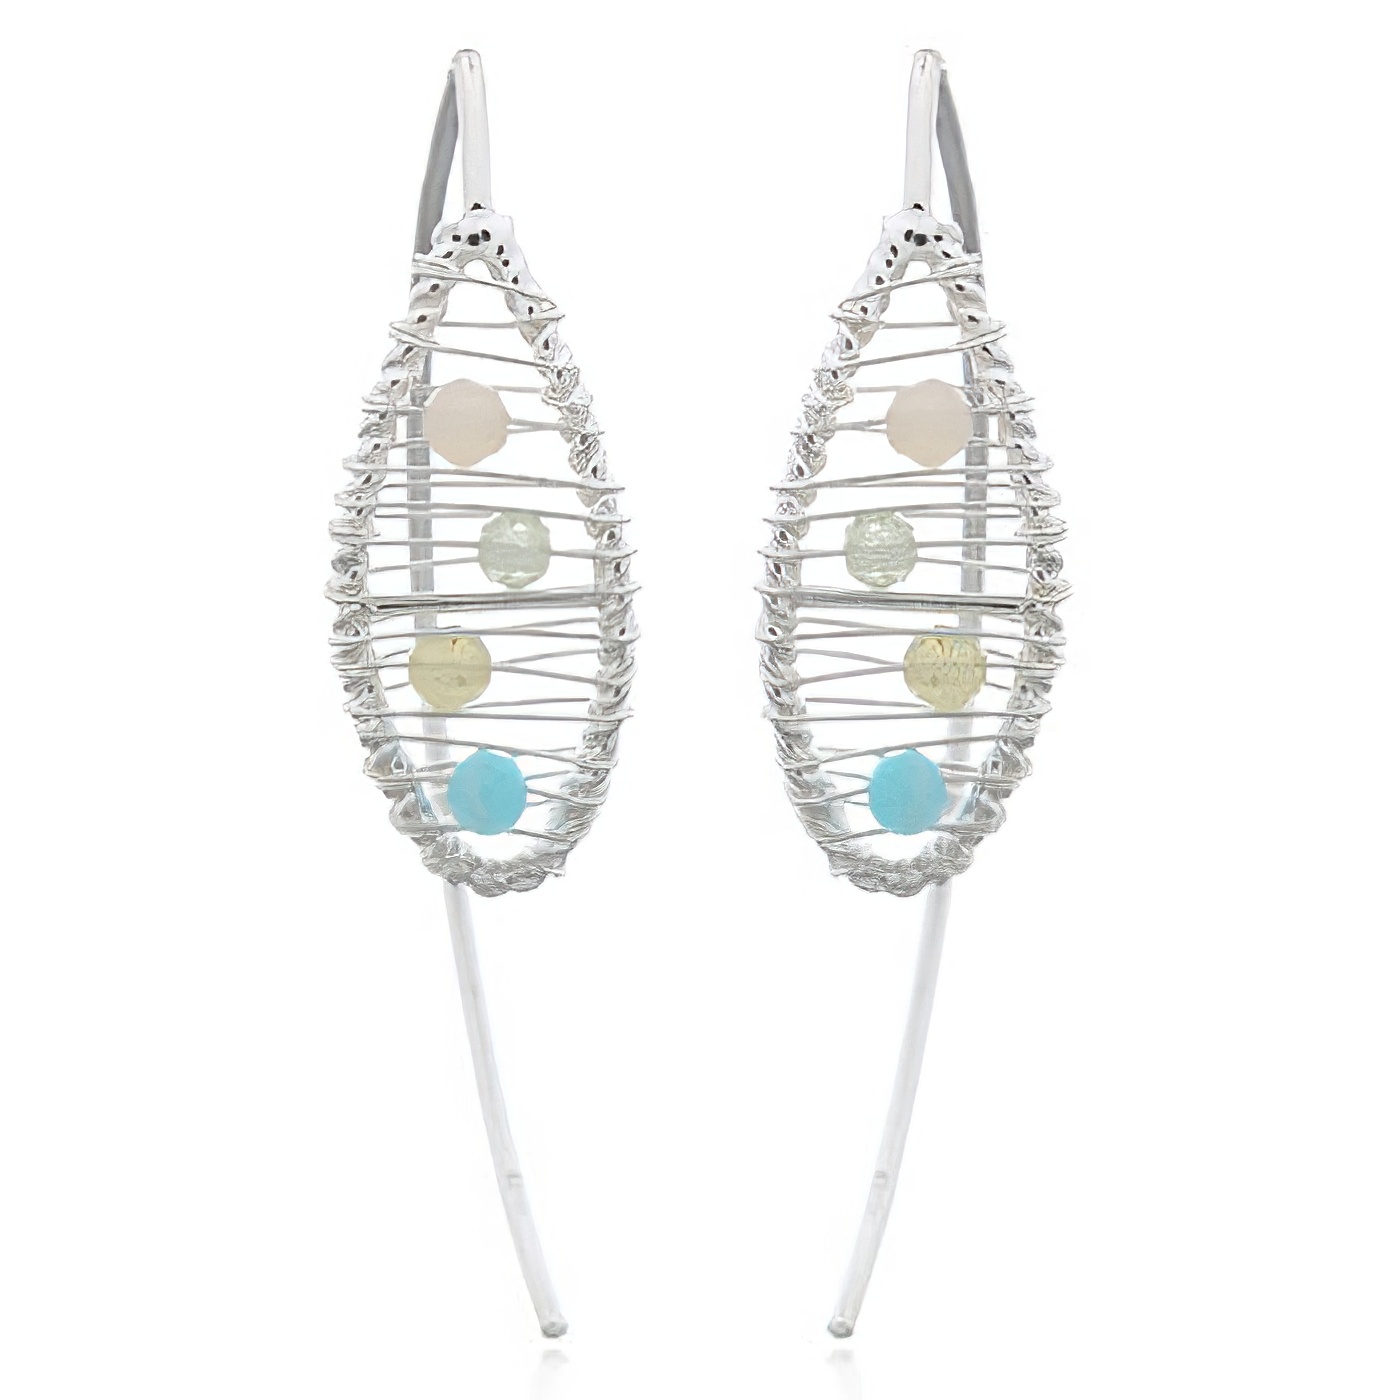 Mixed Stones In Marquise Shape 925 Silver Drop Earrings by BeYindi 